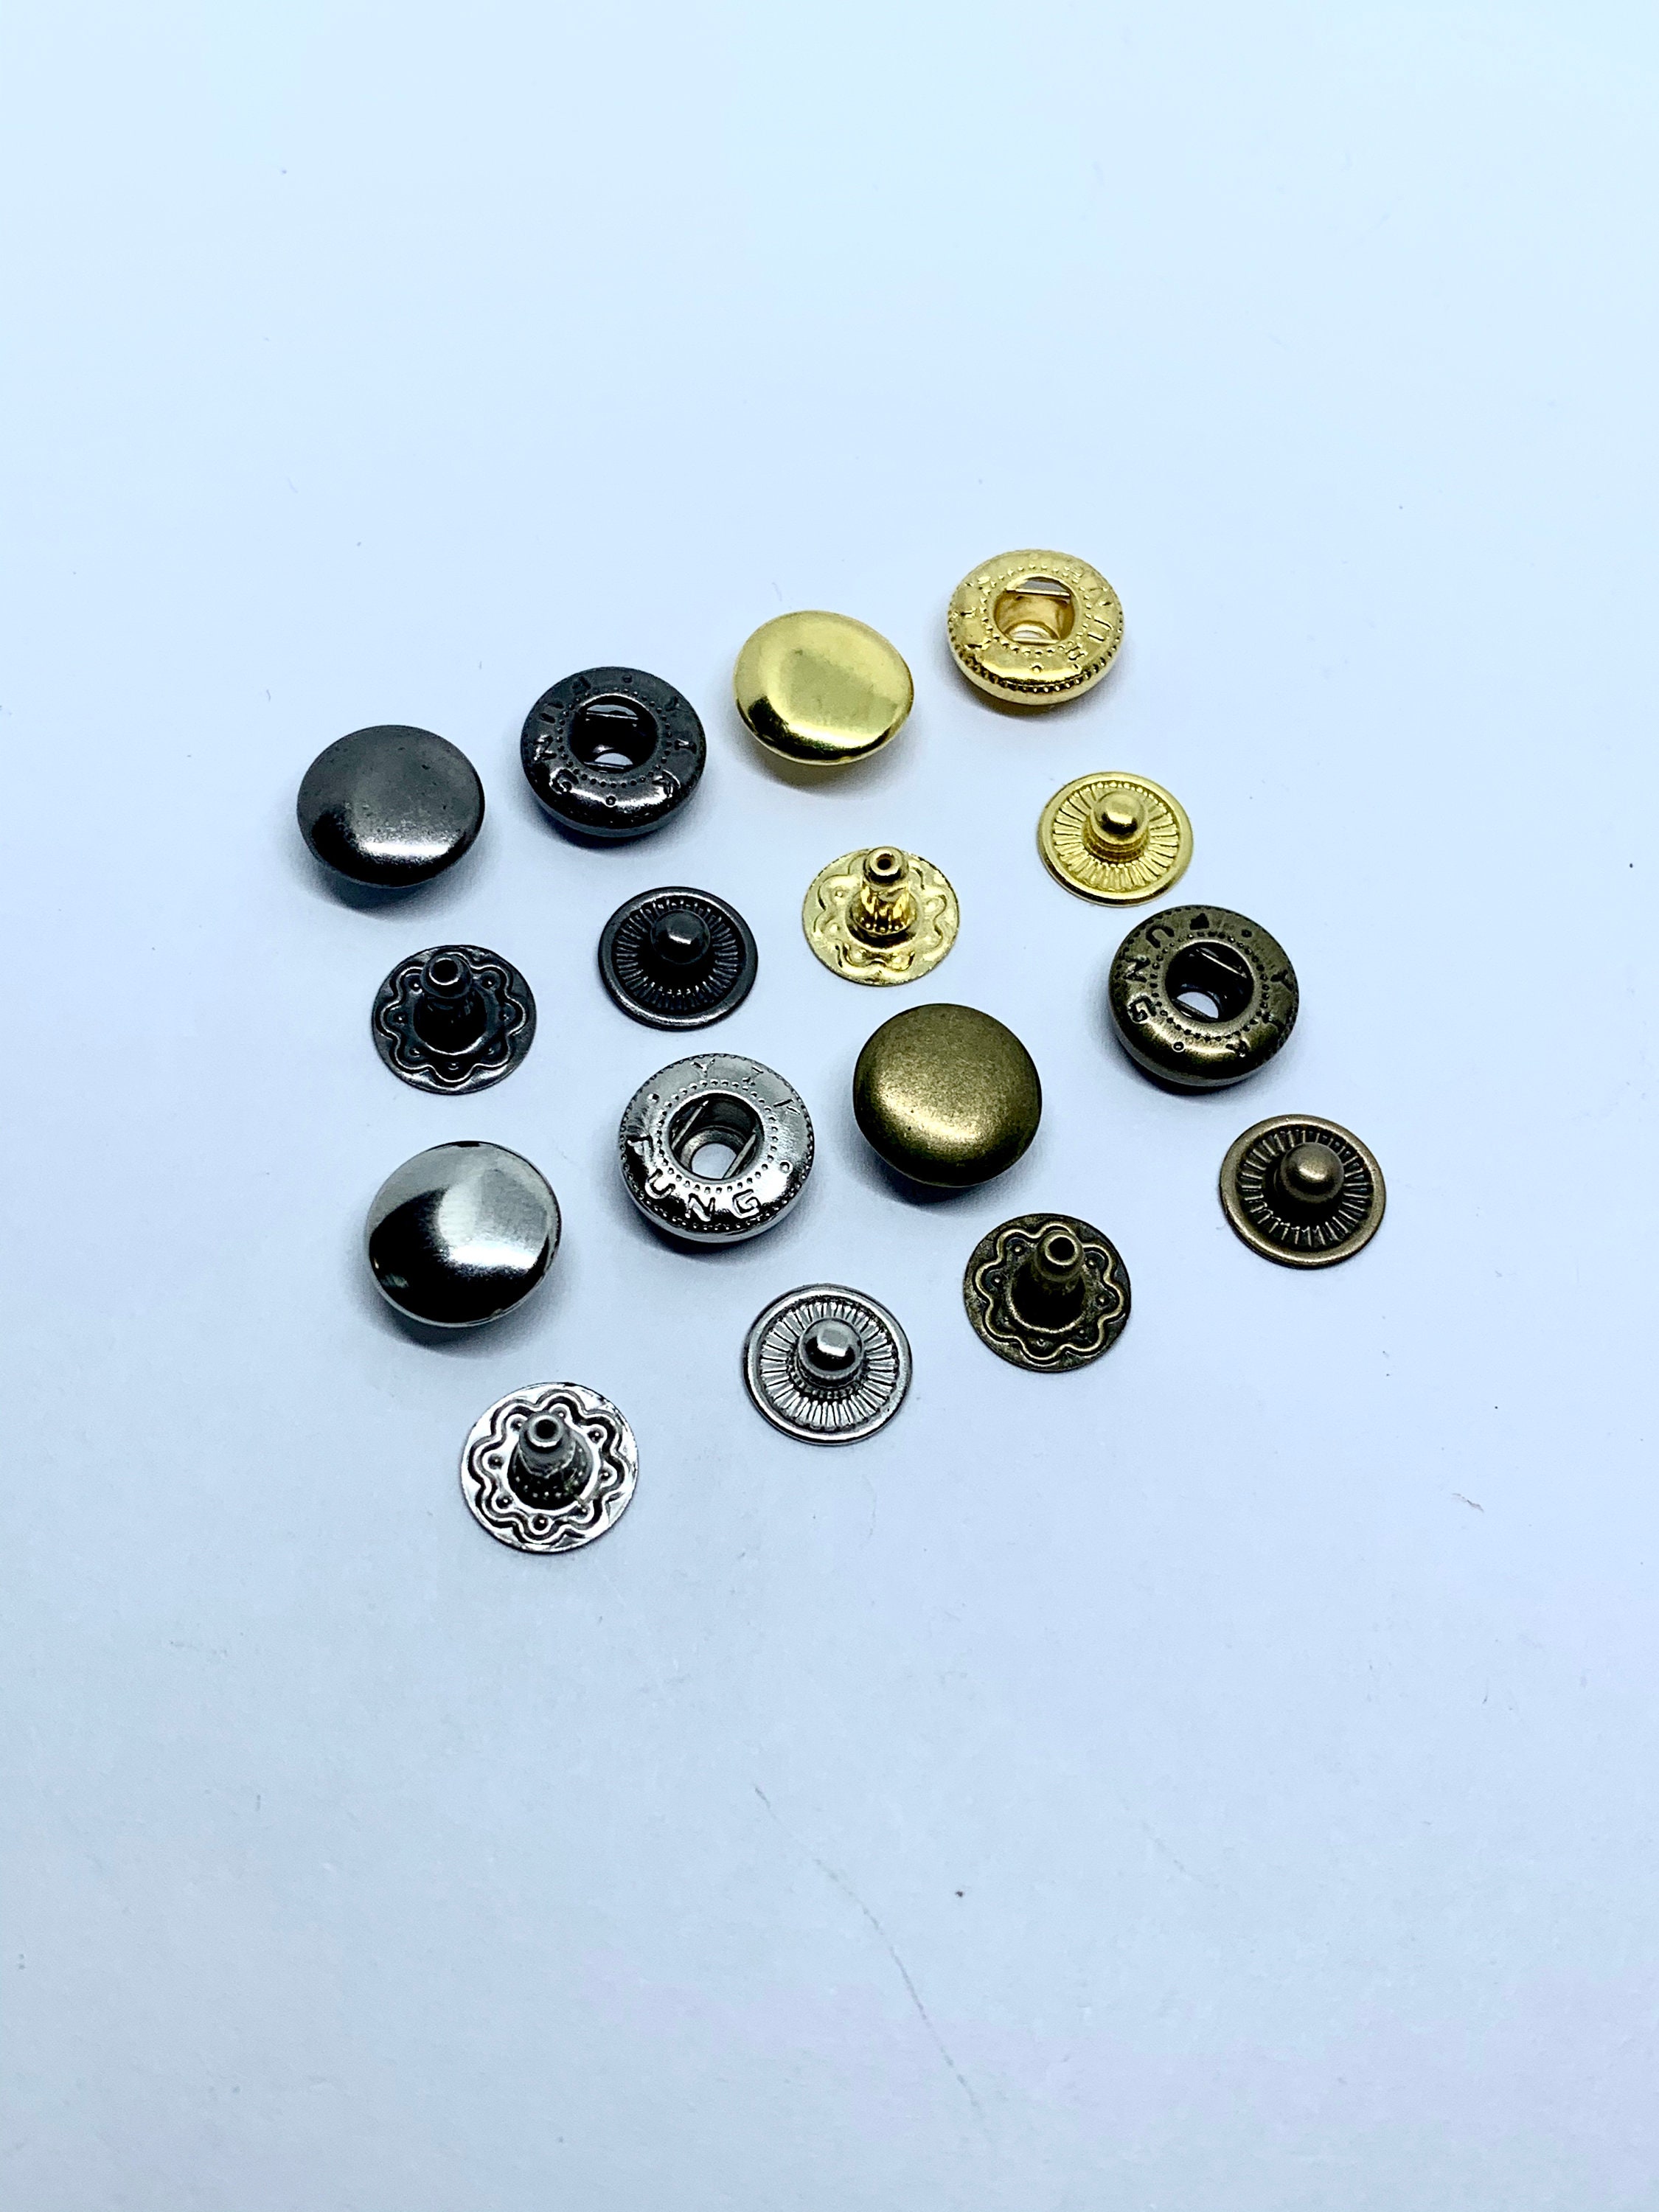  120 Sets 10mm Metal Snap Fasteners Press Stud Rounded Sewing  Rivet Buttons Clothing Leather Craft DIY Poppers Black